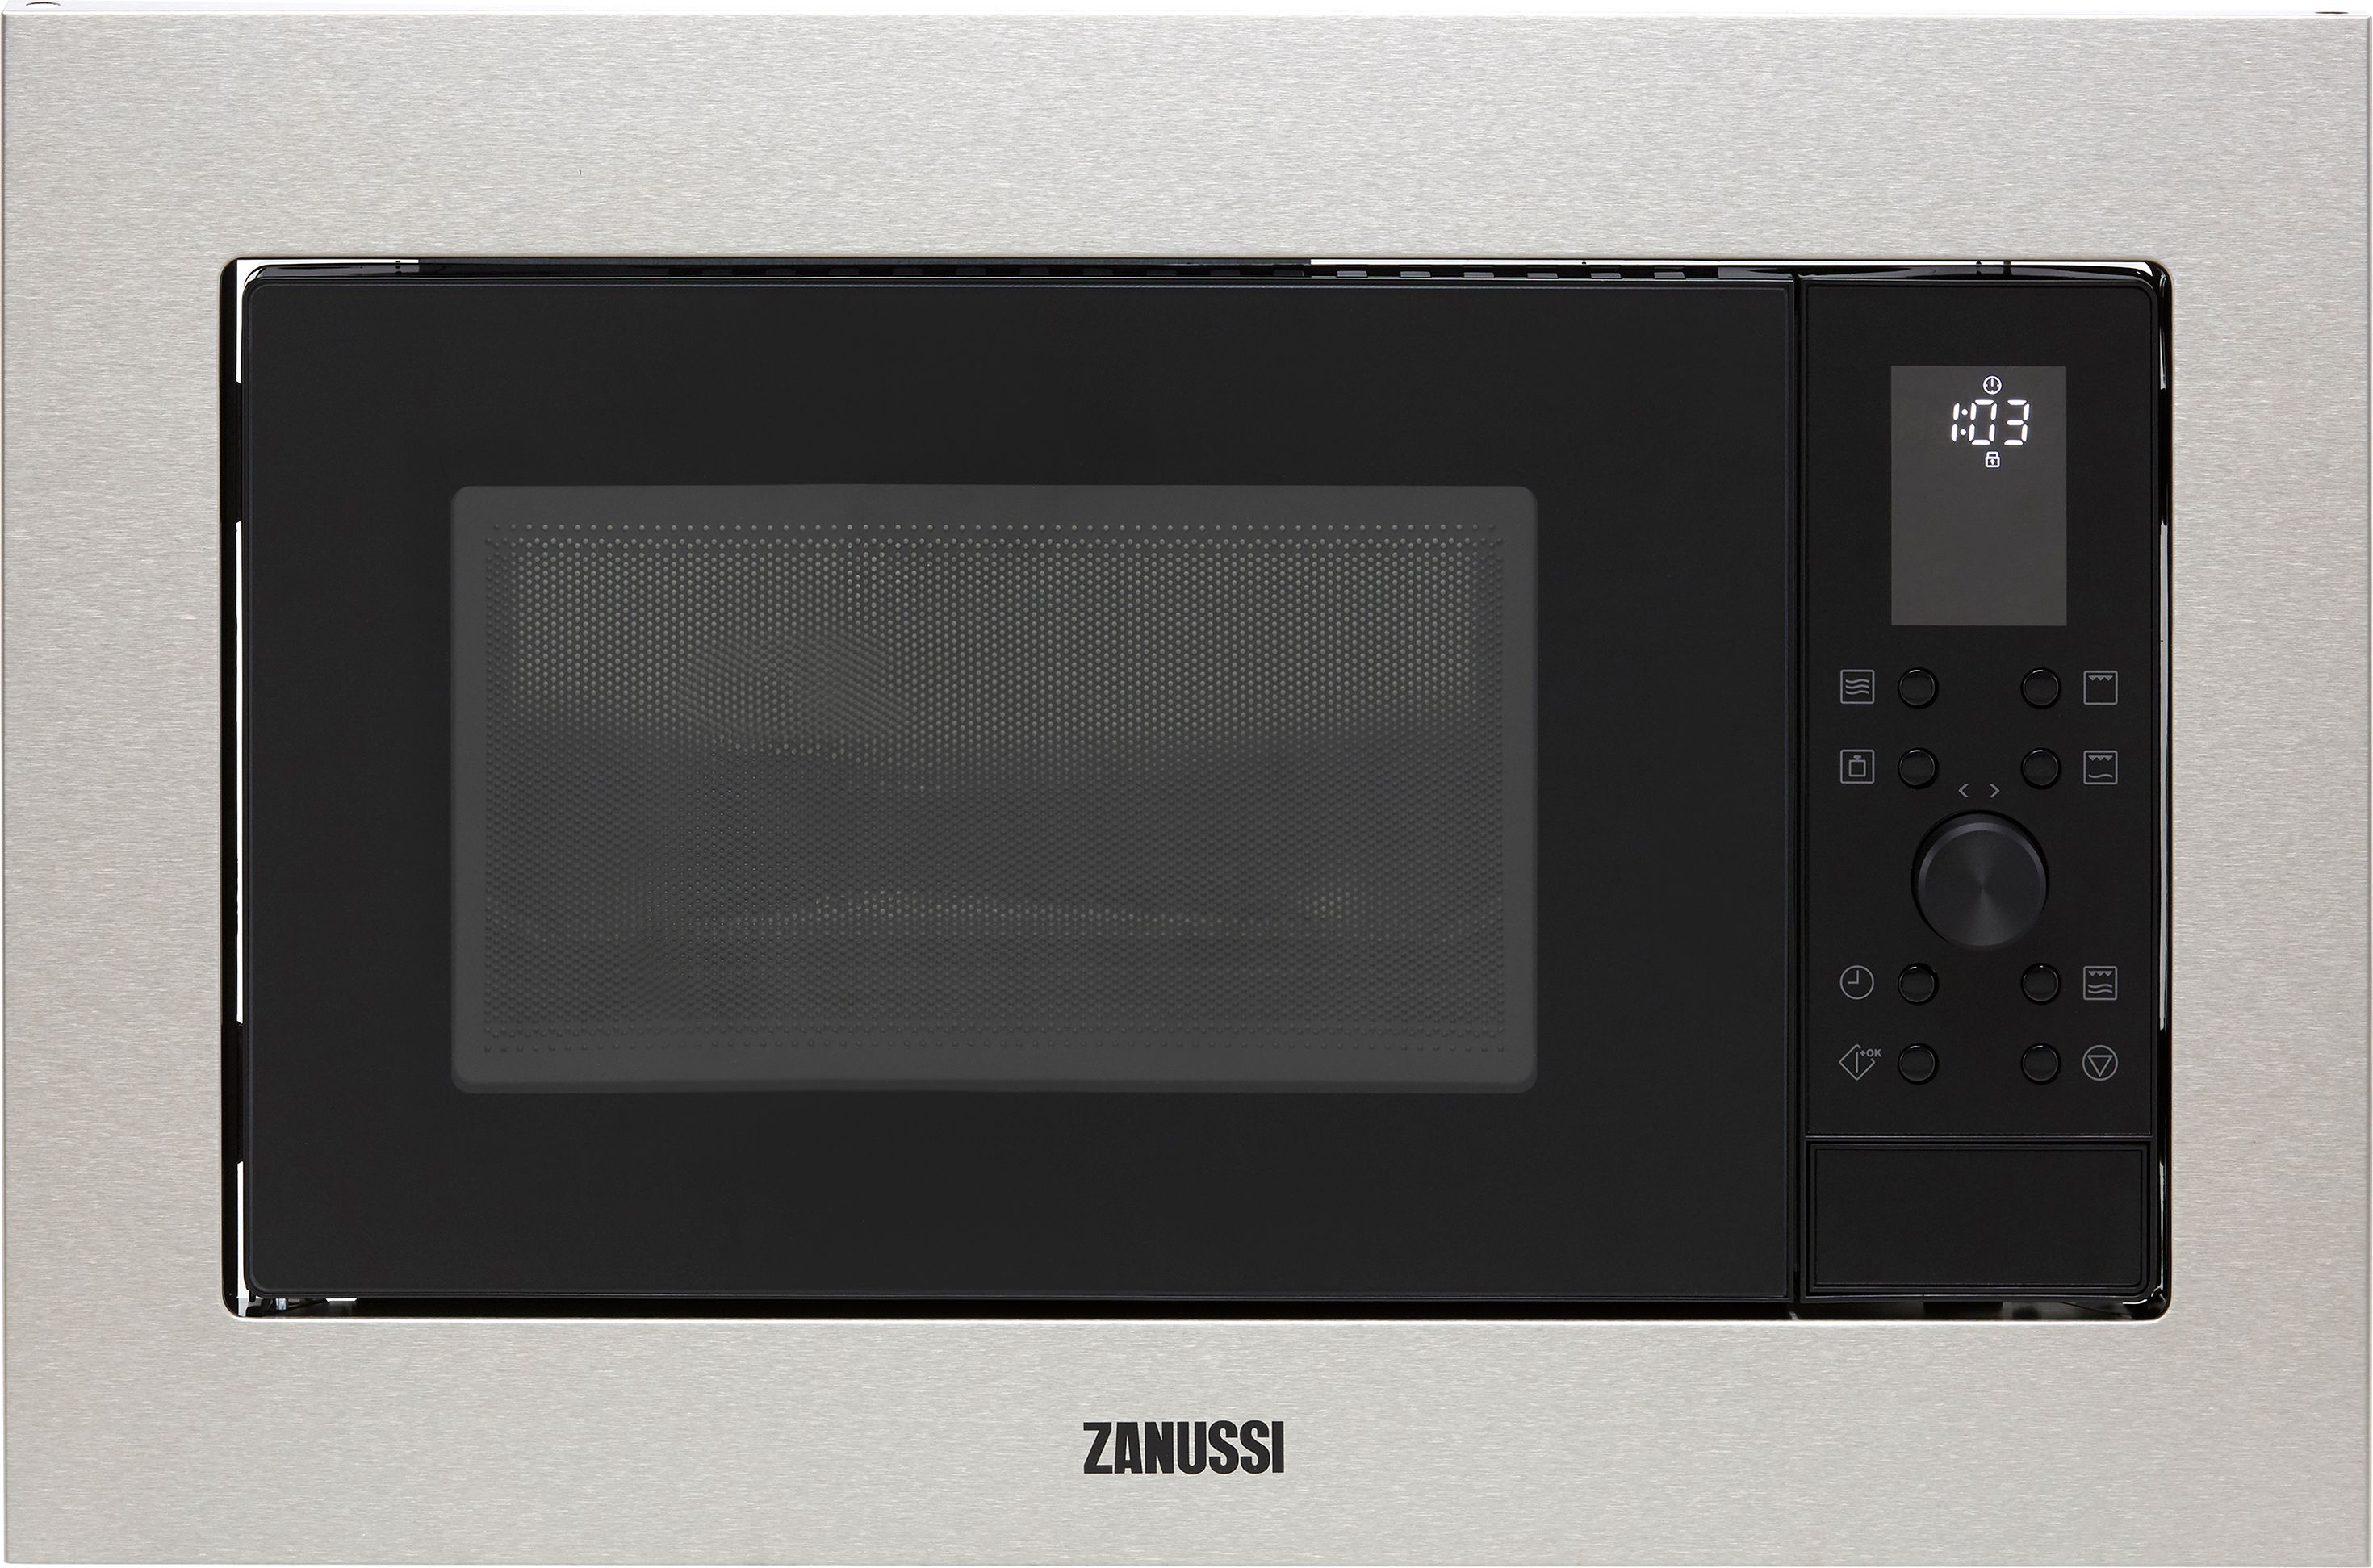 Zanussi ZMSN7DX Built In 39cm Tall Compact Microwave - Stainless Steel, Stainless Steel